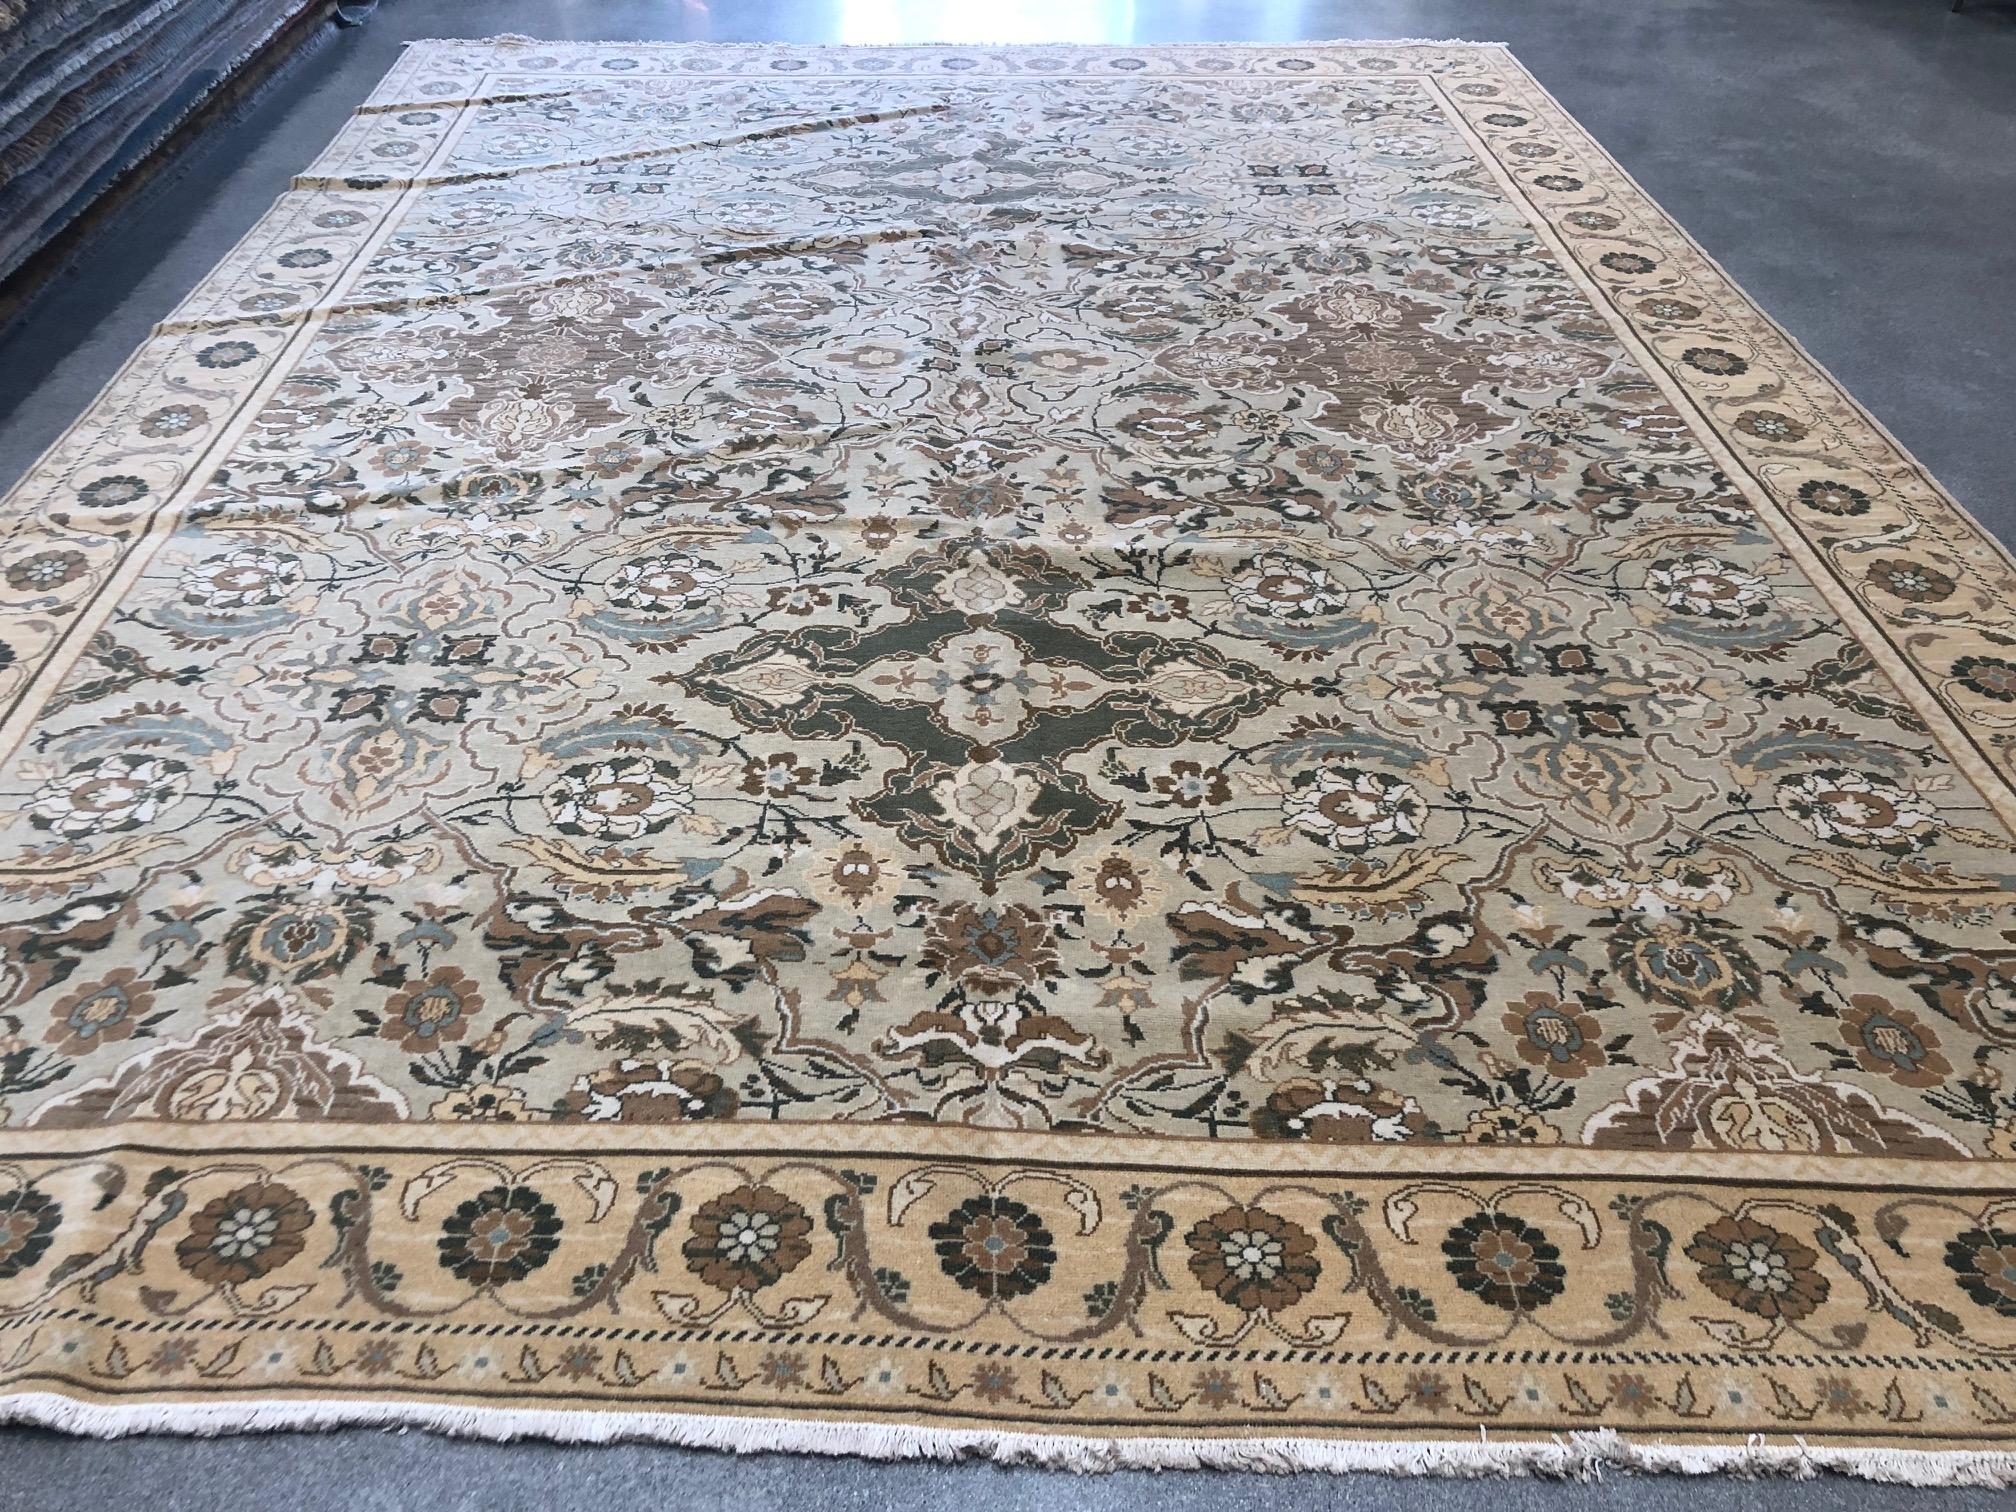 Nature comes inside as green, yellow, rust and sliver tones swirl across a beige canvas in this elegant Polonaise style floral rug. Hand knotted wool.